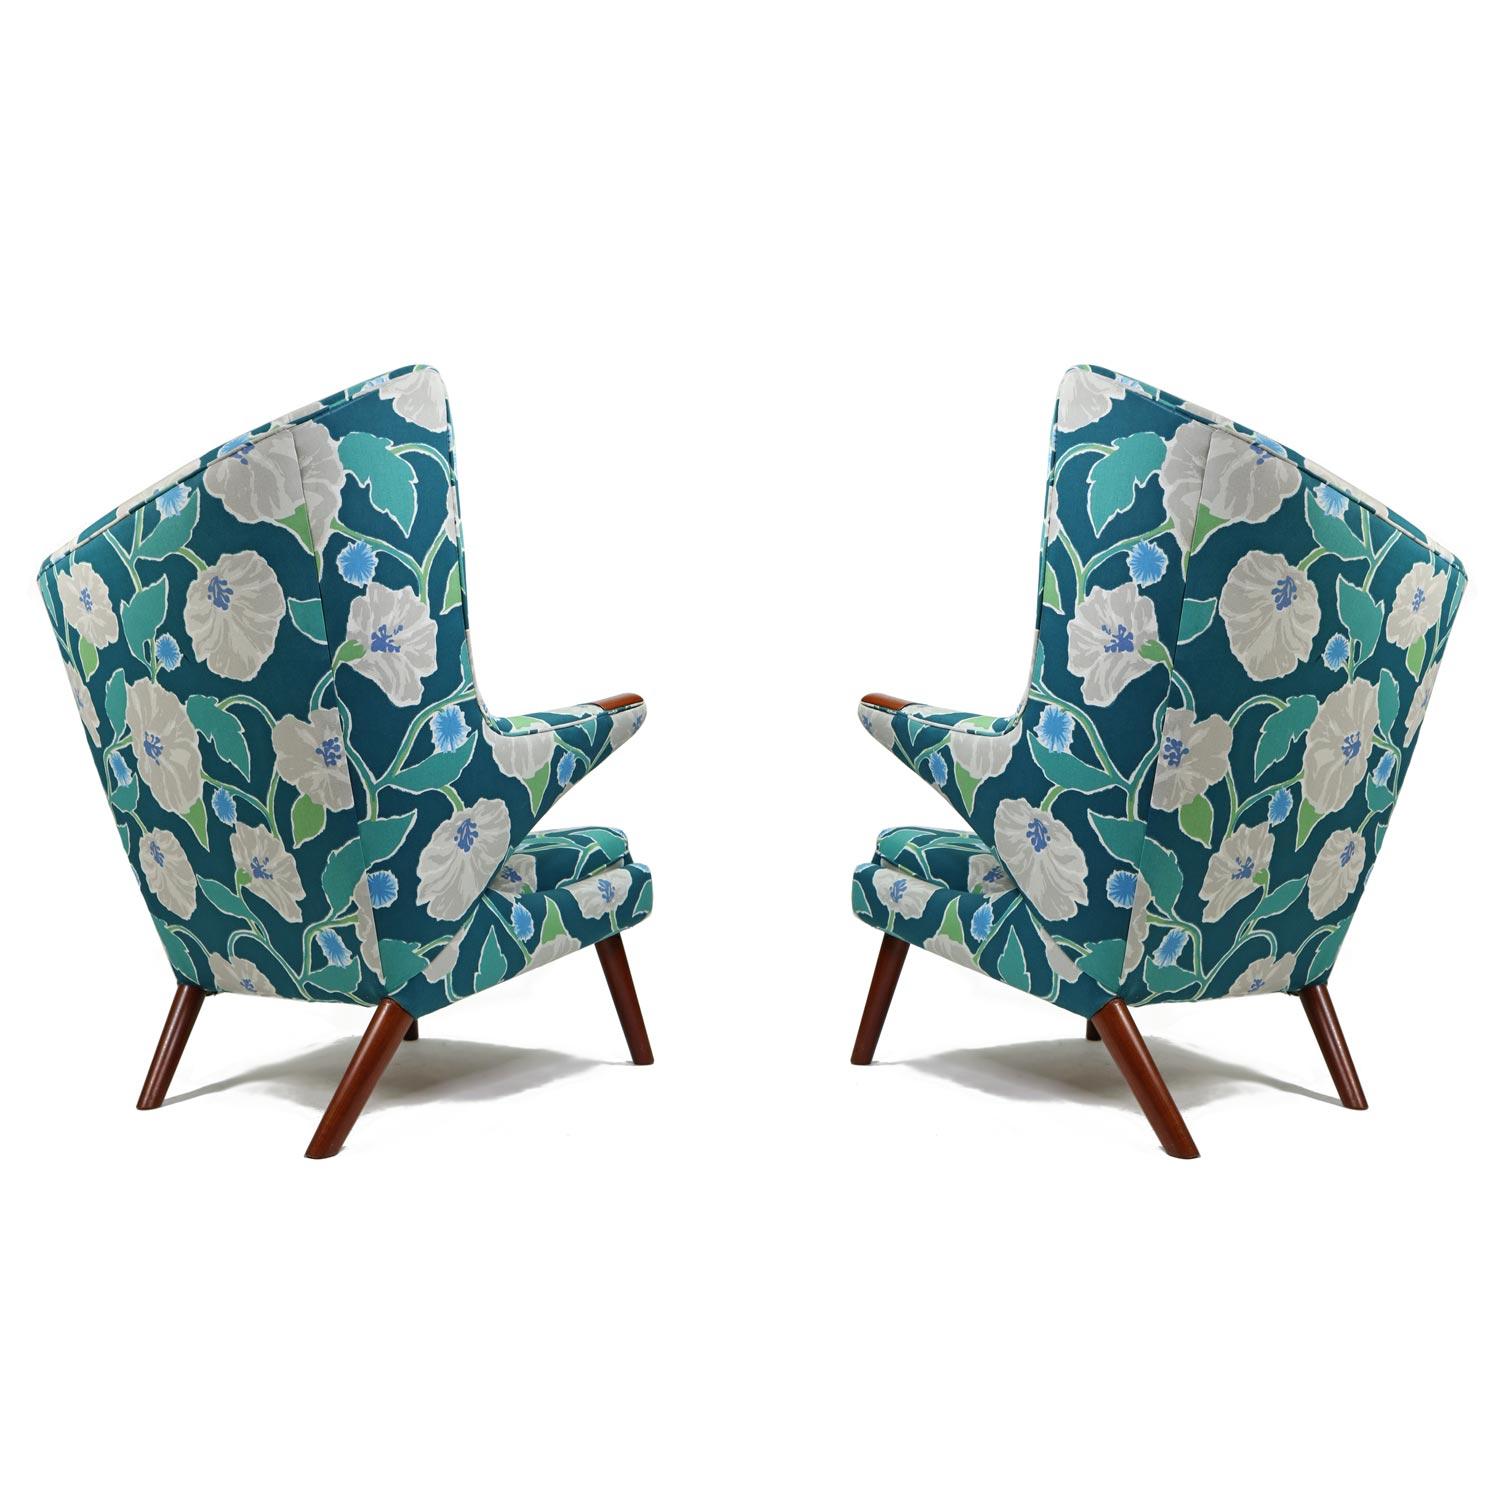 Mid-20th Century Vintage Hans Wegner Papa Bear Chair Set with Ottoman in Floral Print